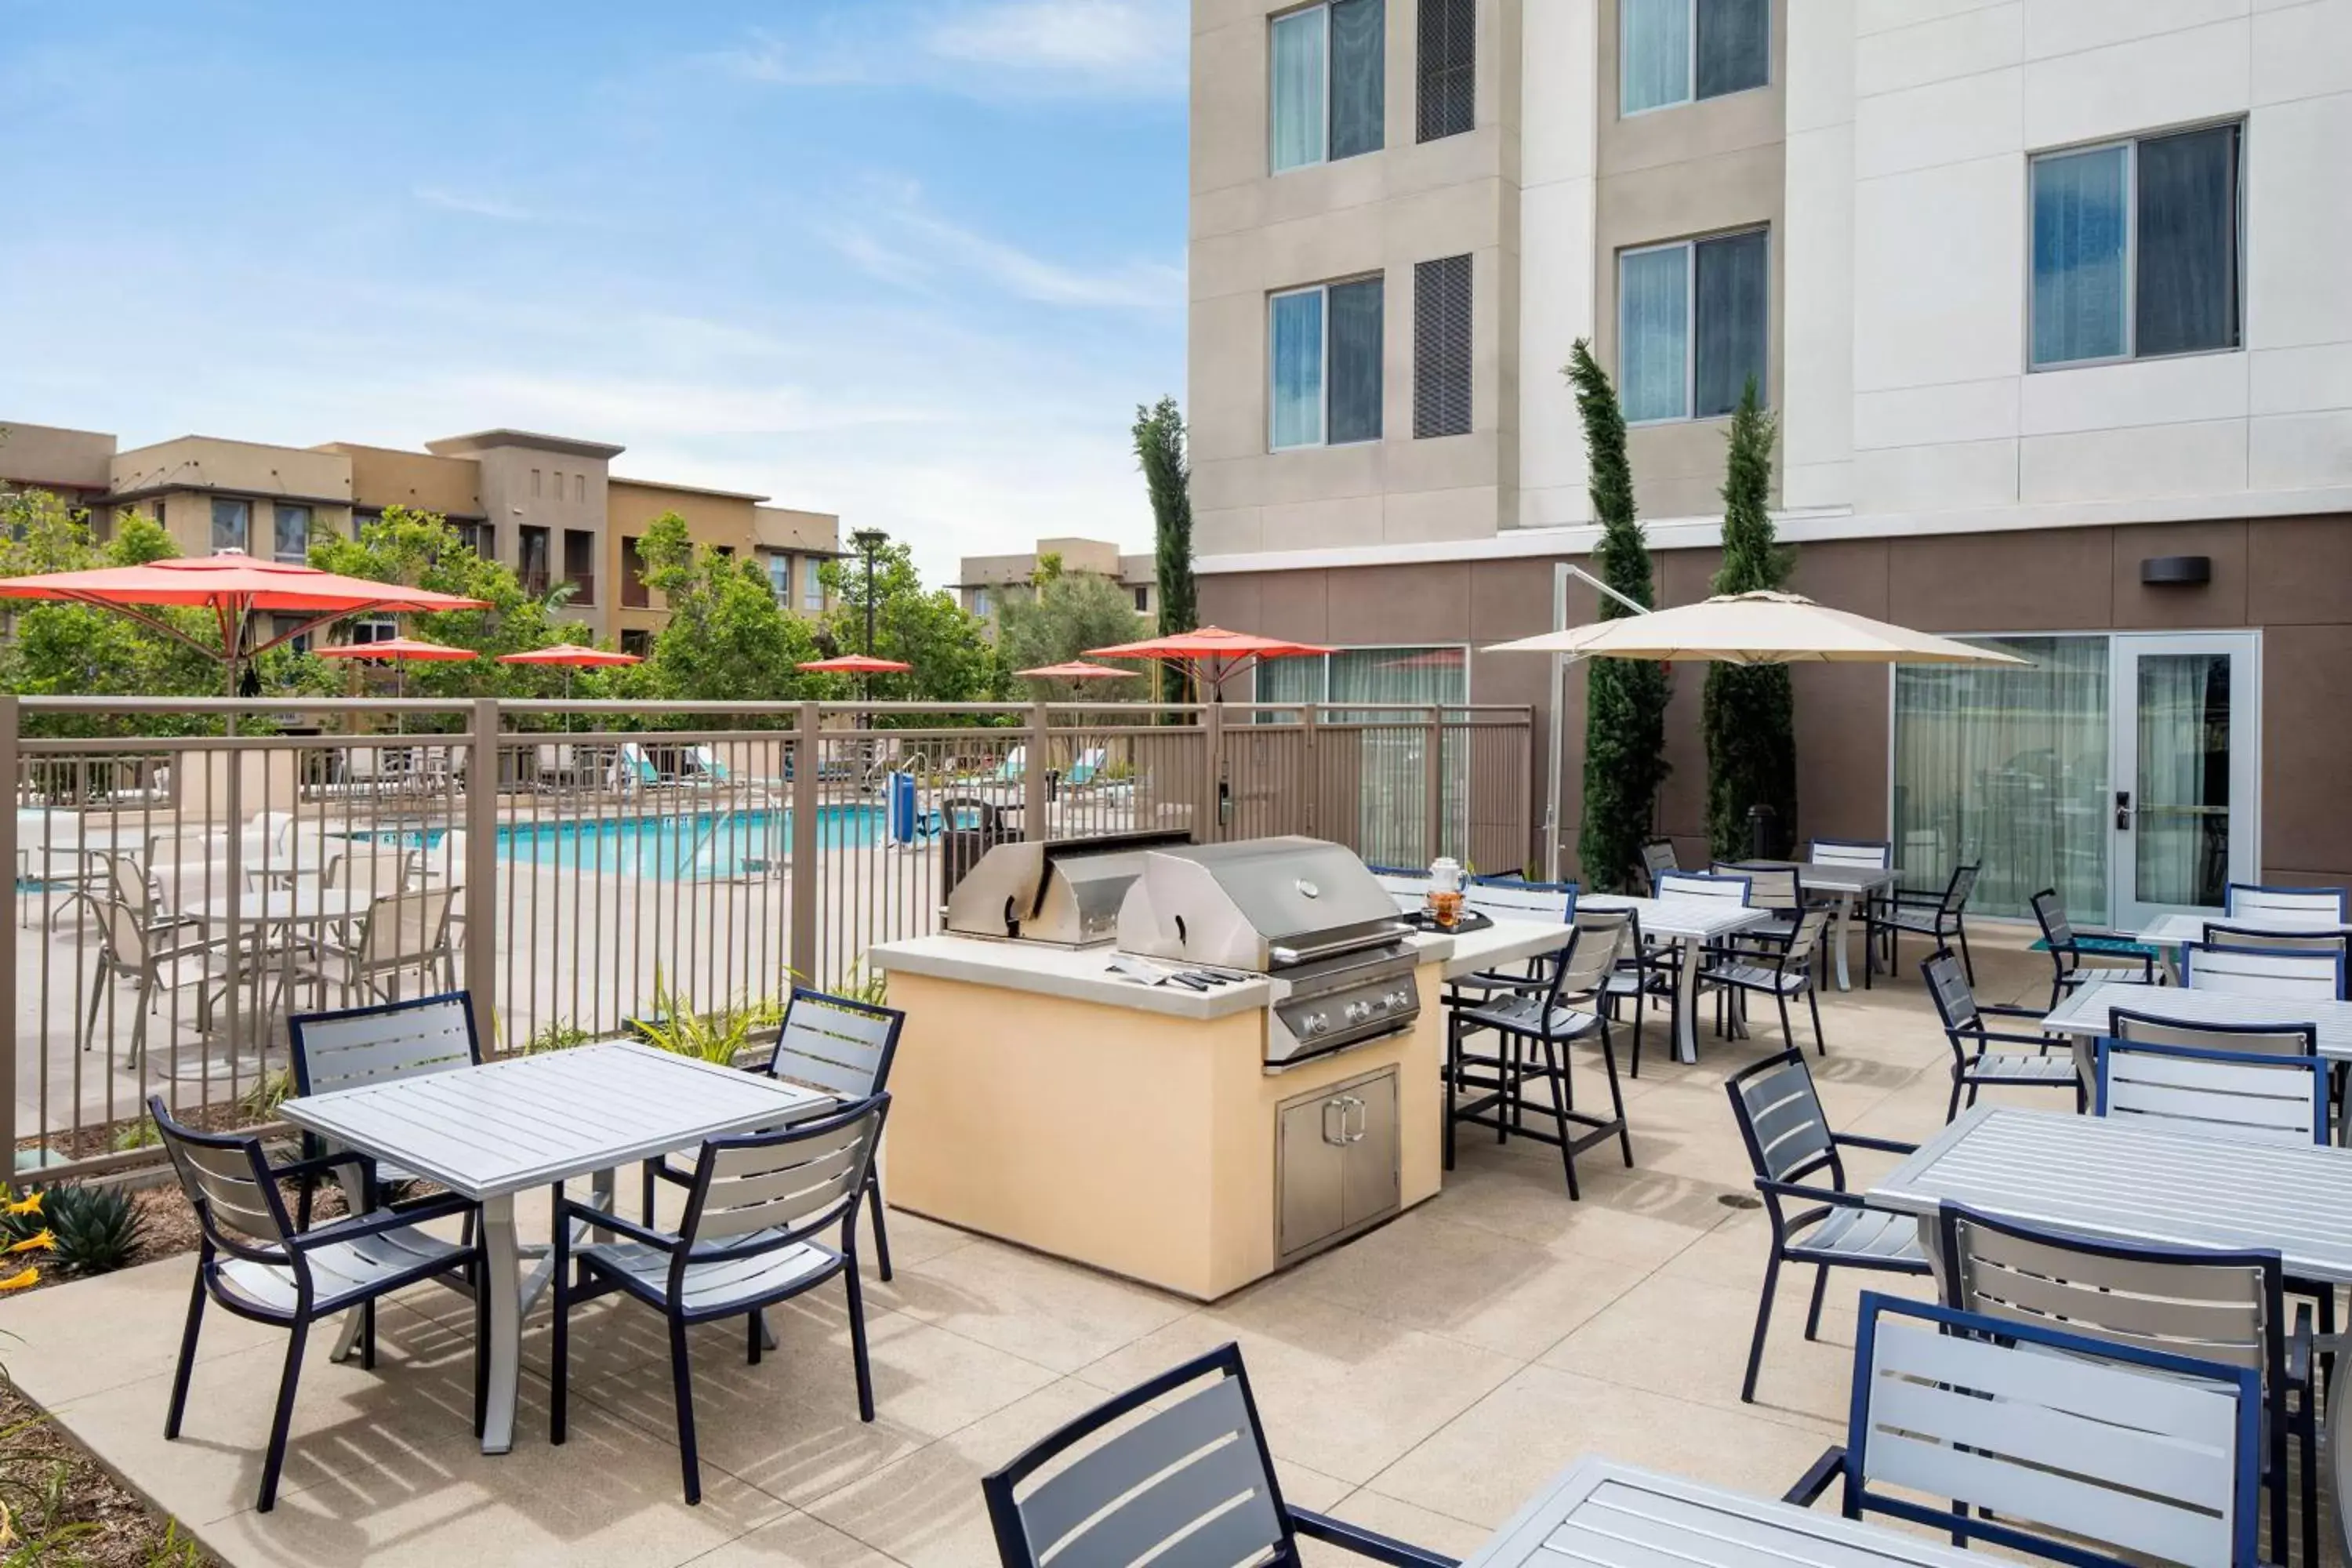 Property building in Homewood Suites by Hilton Aliso Viejo Laguna Beach